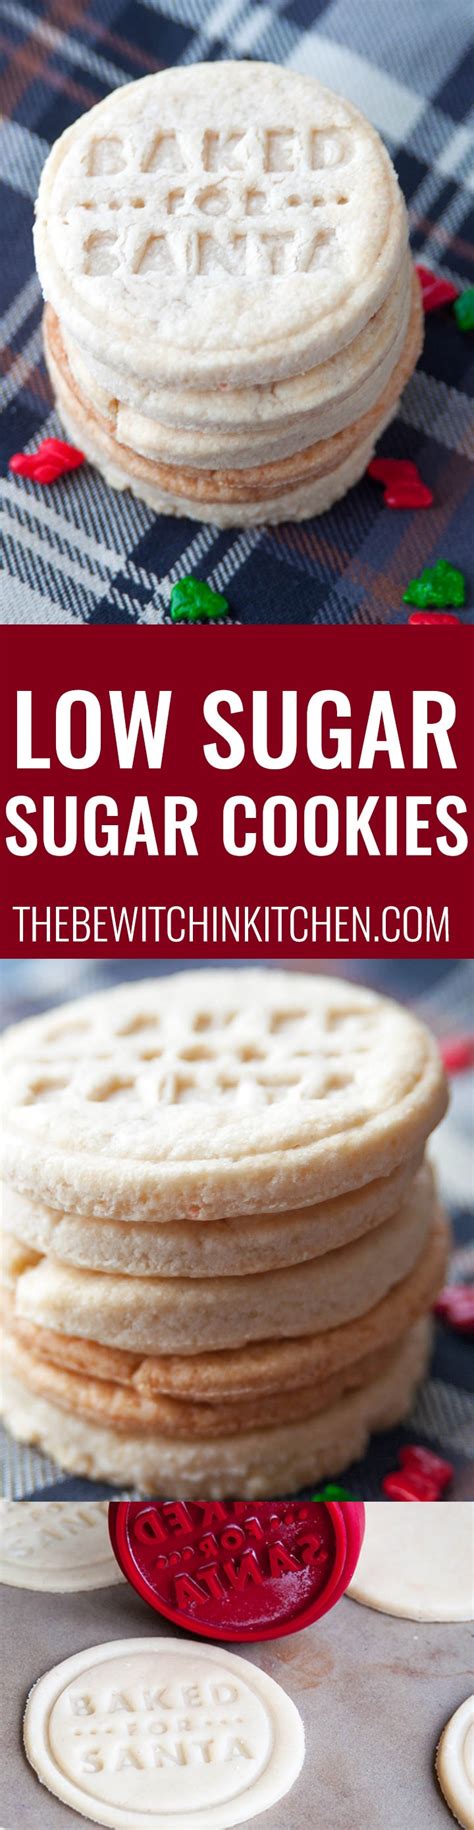 These treats are lower in sugar, fat, and cholesterol than your average chocolate chip cookies. Low Sugar Cookies Recipe | The Bewitchin' Kitchen